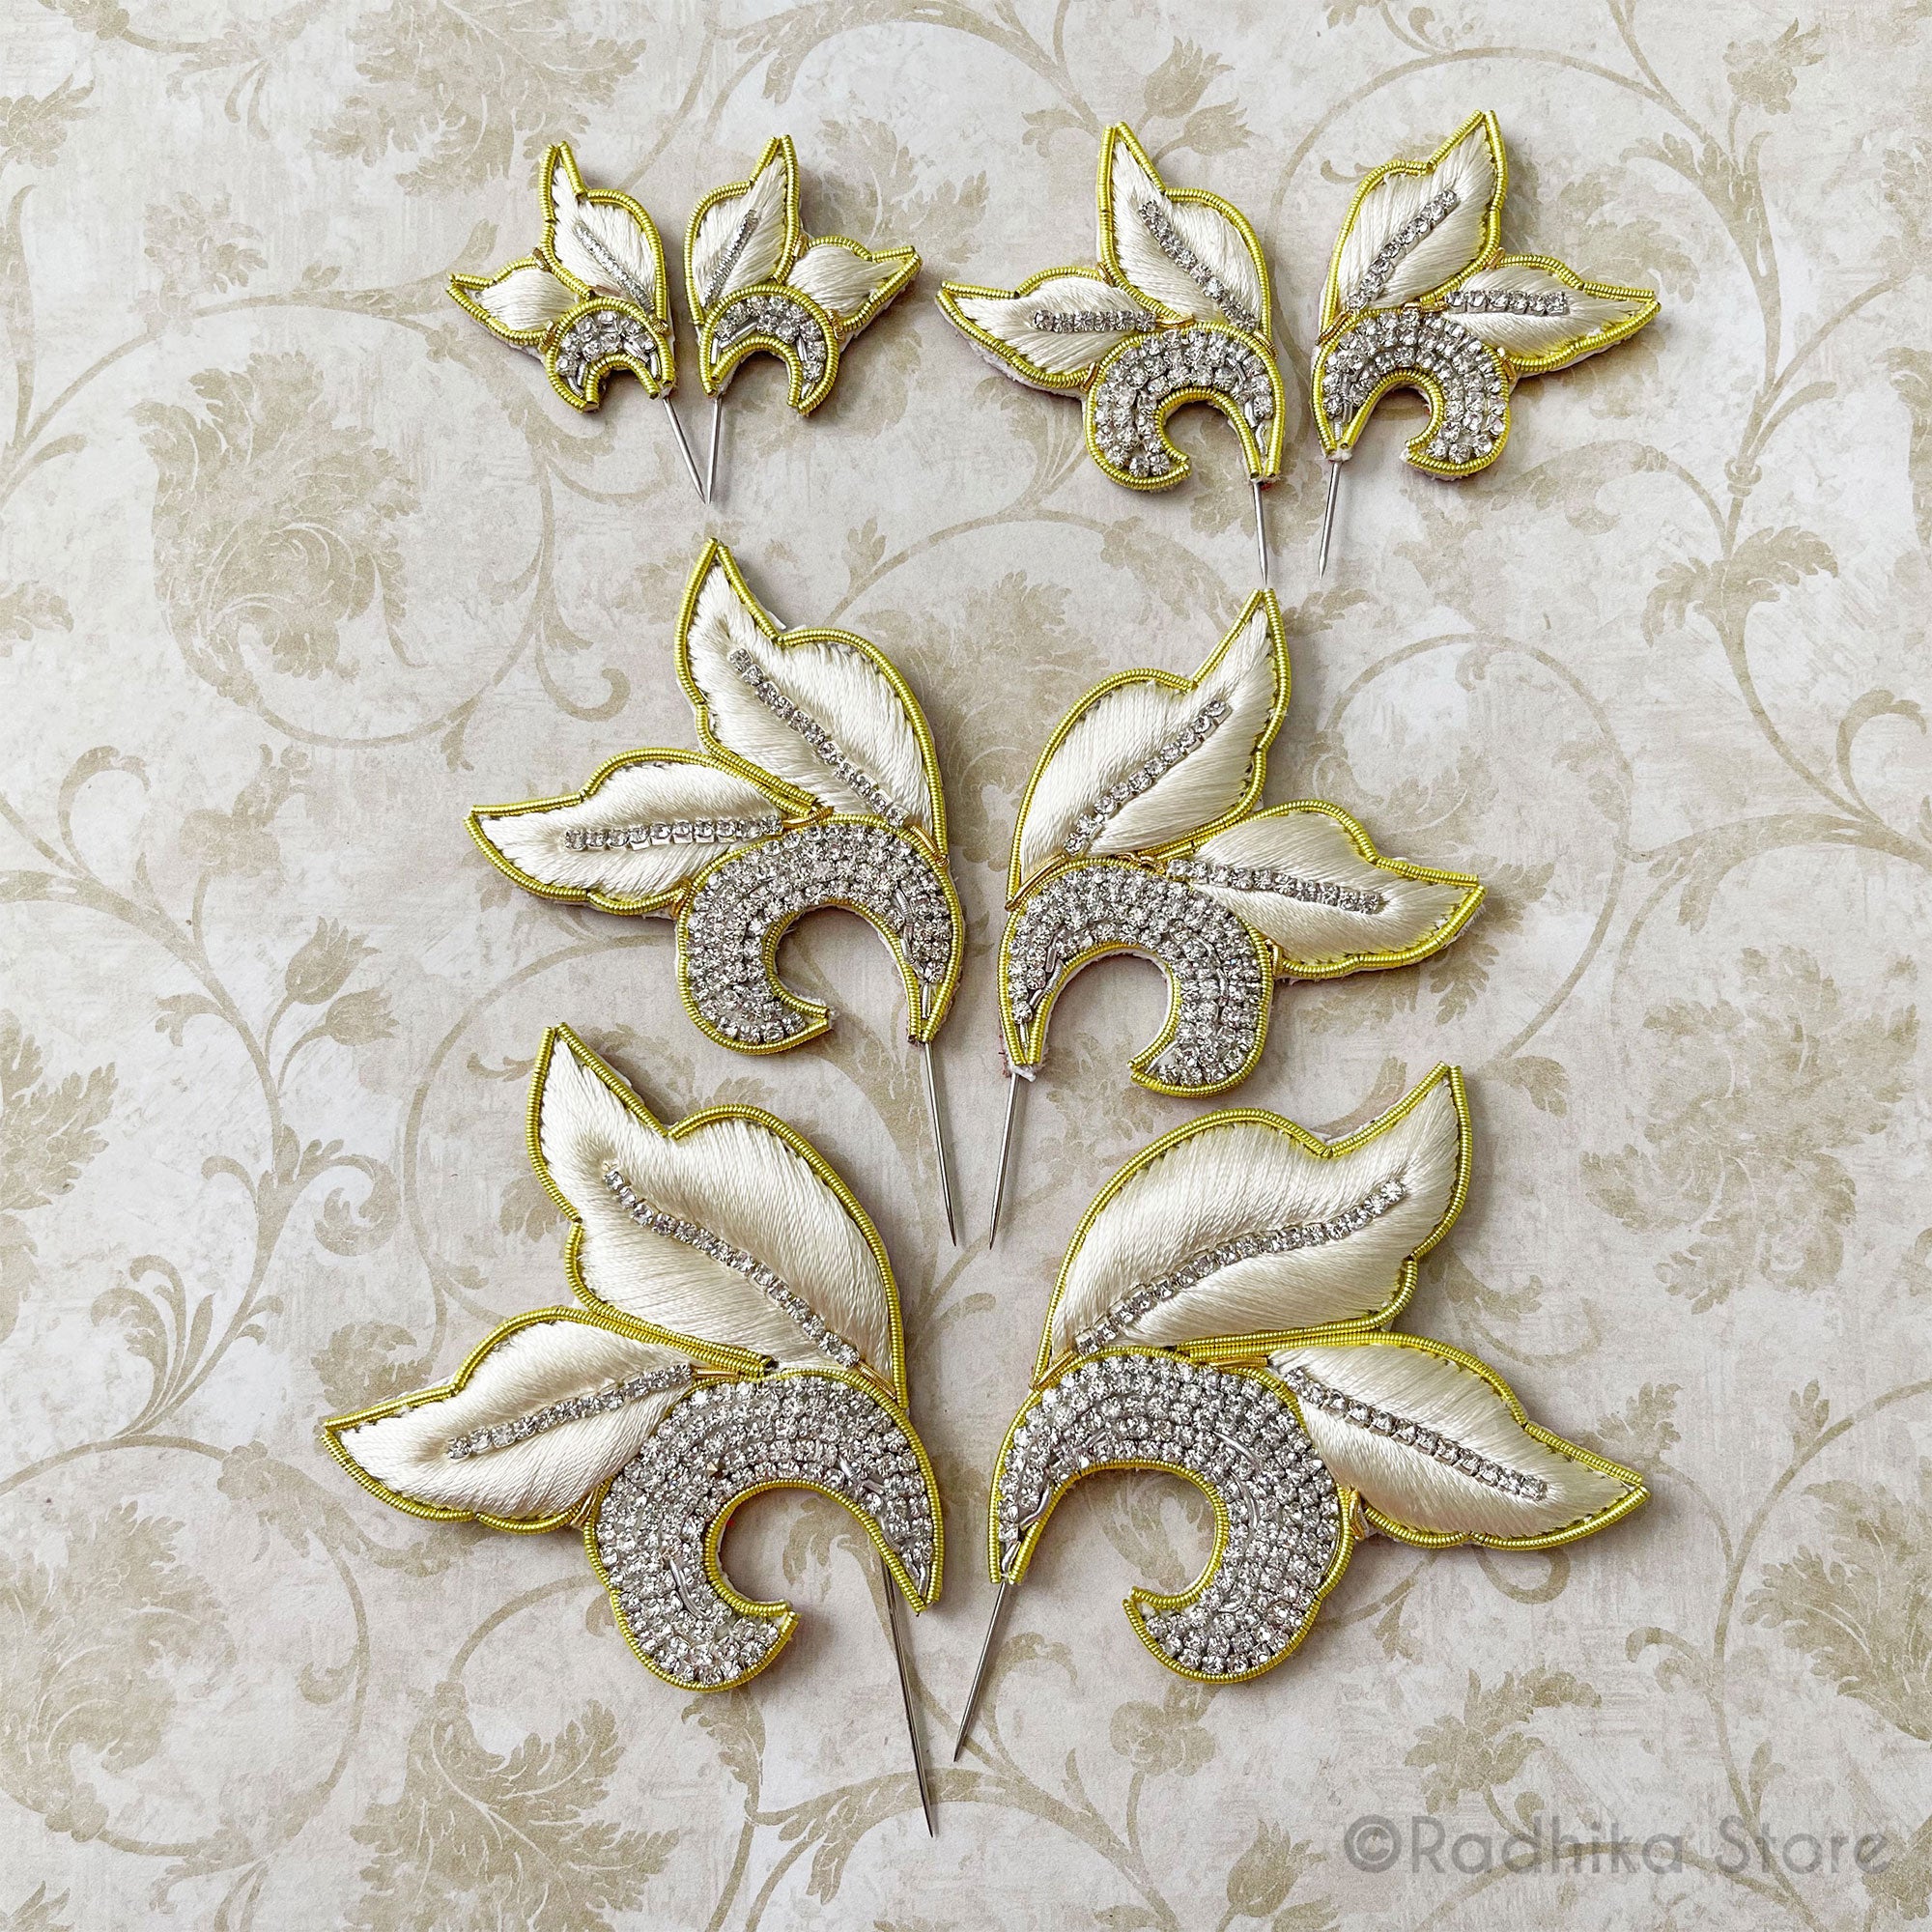 Cream with Gold Embroidery Turban Pins - Leaf Curls - Set of 2